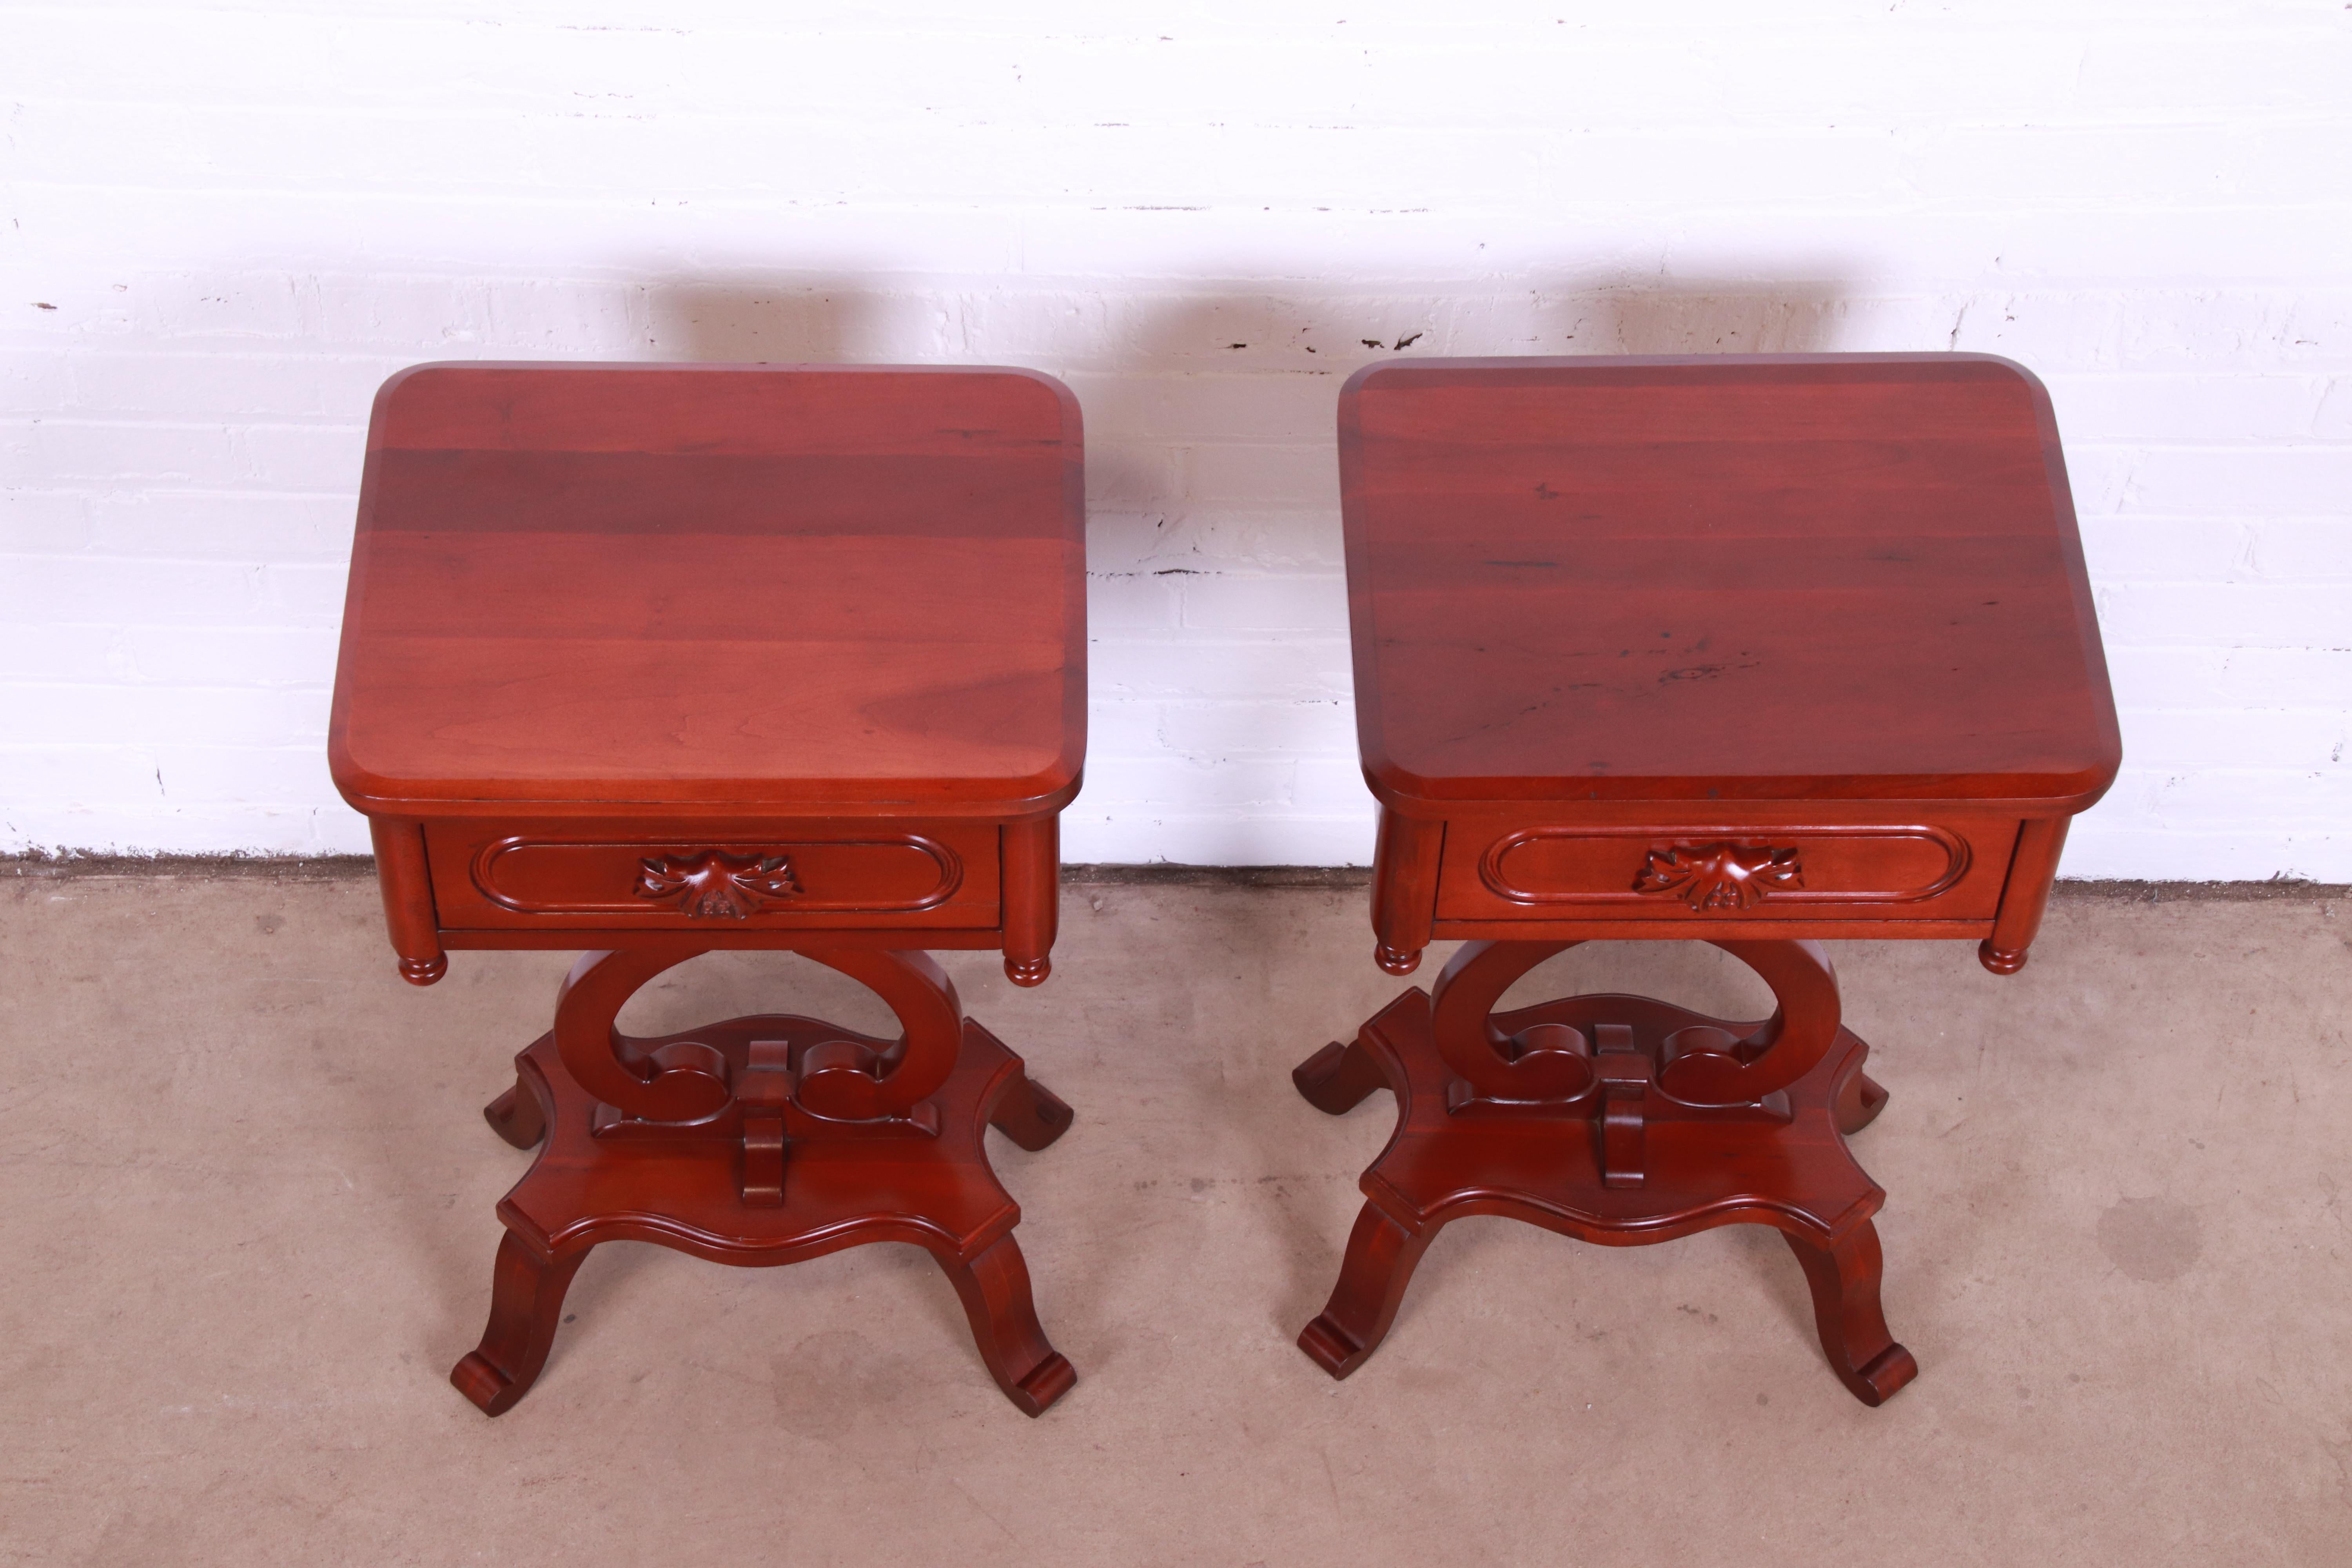 Lillian Russell Collection Victorian Cherry Nightstands by Davis Cabinet Co. 4